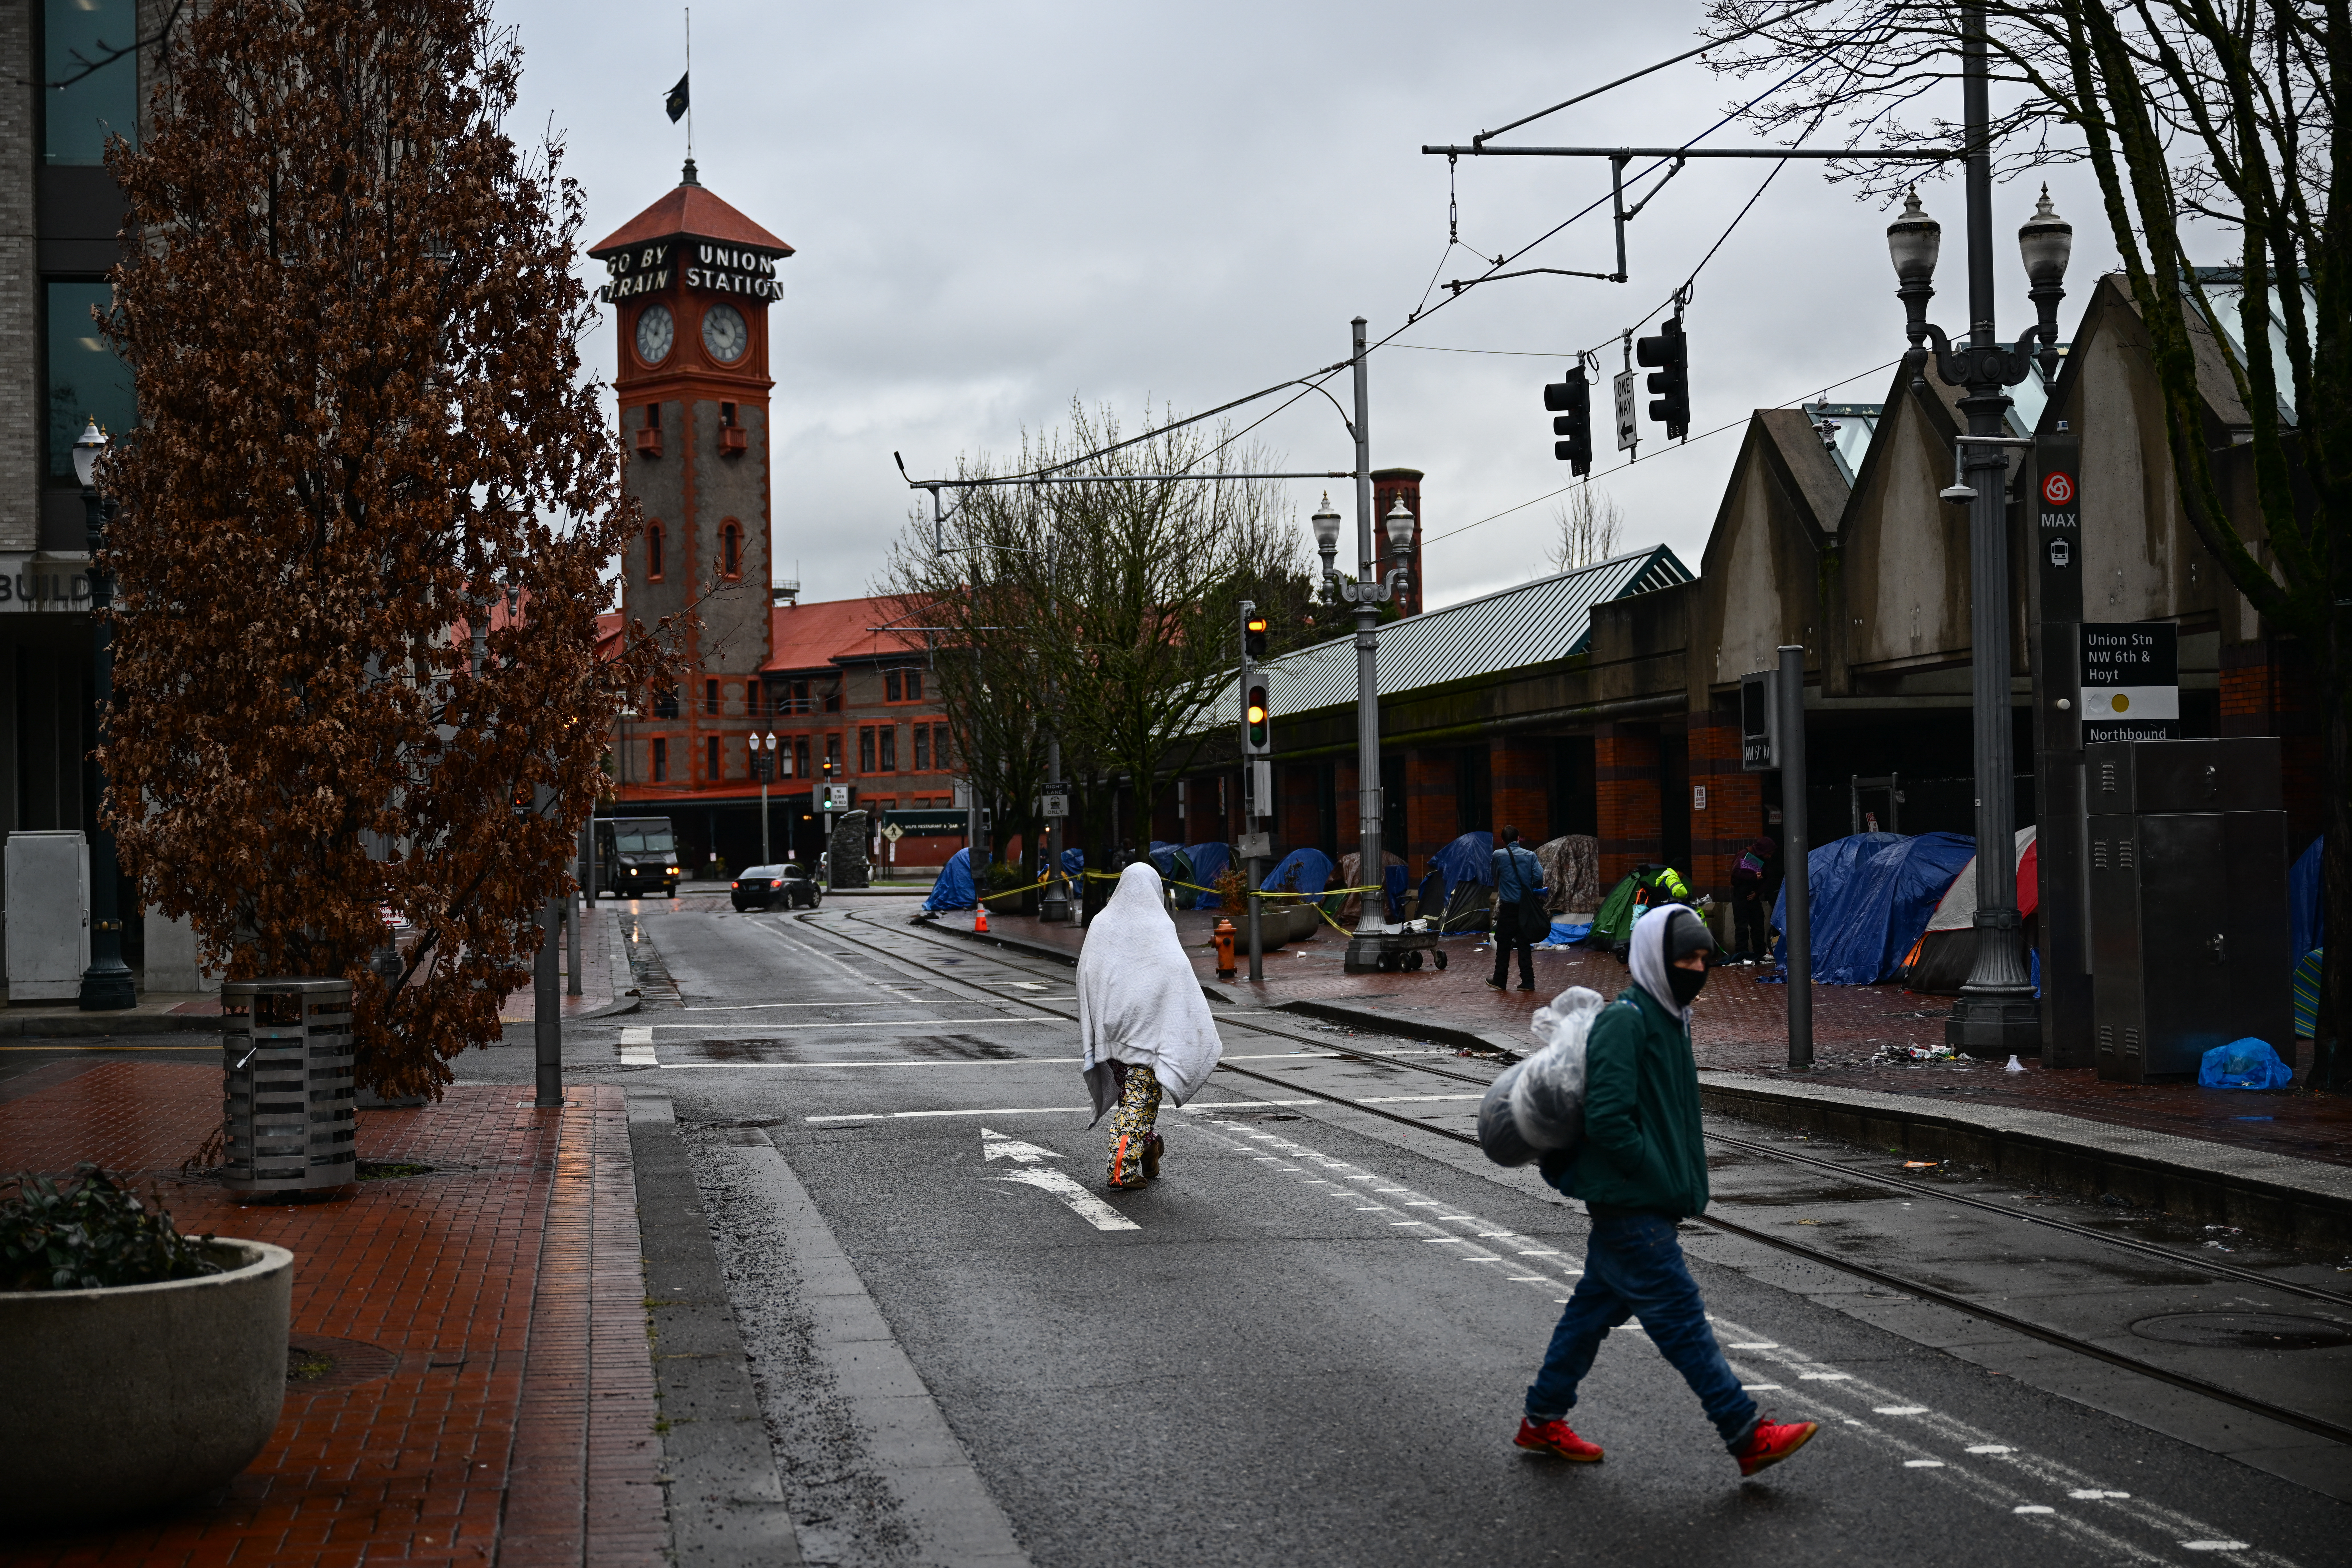 A person walks covered with a blanket past an encampment of tents on the street near Union Station in Portland, Oregon on January 24, 2024. In the midst of a presidential election year, Portland's decline is brandished by the conservative press depicting a city ravaged by its progressive ideals, in a state controlled by the left for over 40 years. (Photo by Patrick T. Fallon / AFP) (Photo by PATRICK T. FALLON/AFP via Getty Images)